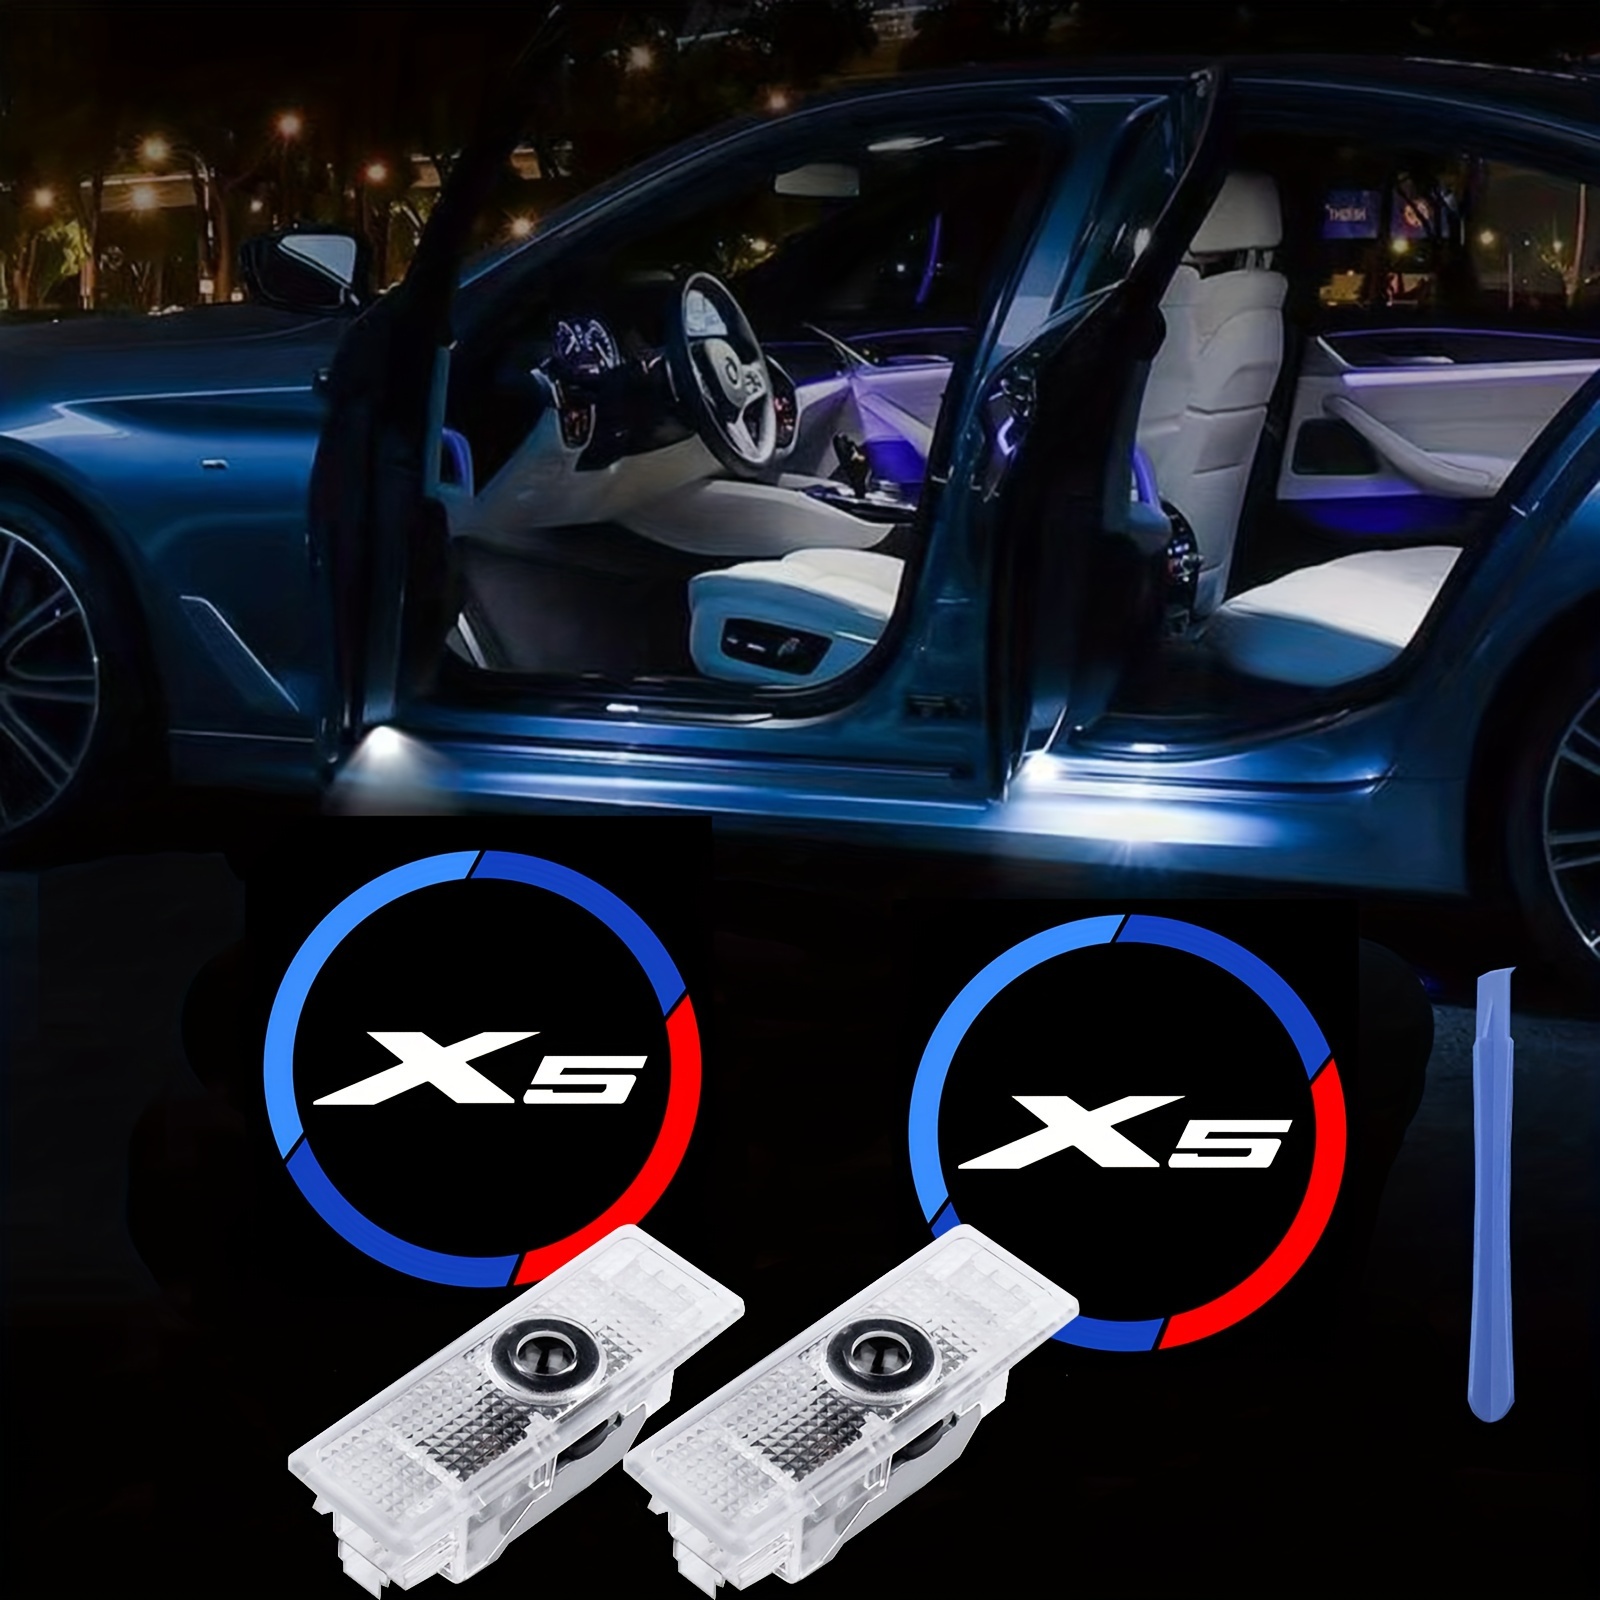 

2 Pieces Car Logo Door Light Led Lighting Projector Car Welcome Emblem Lamp Compatible For Bmw X3 X4 X5 X6 X7